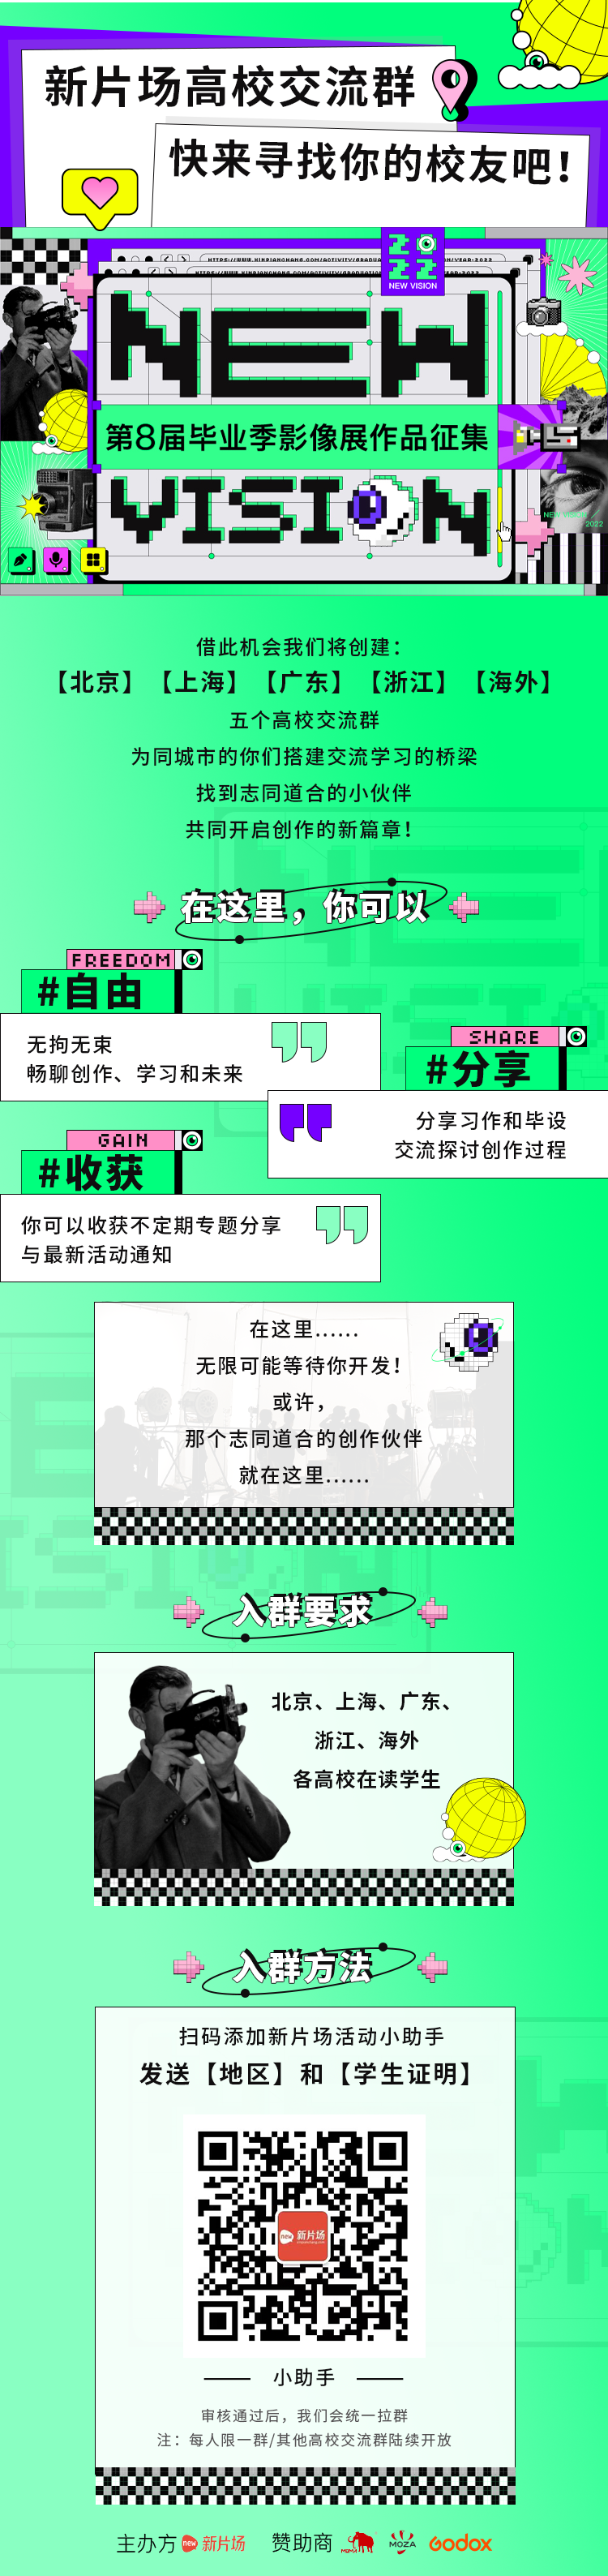 new vision长图 拷贝.png